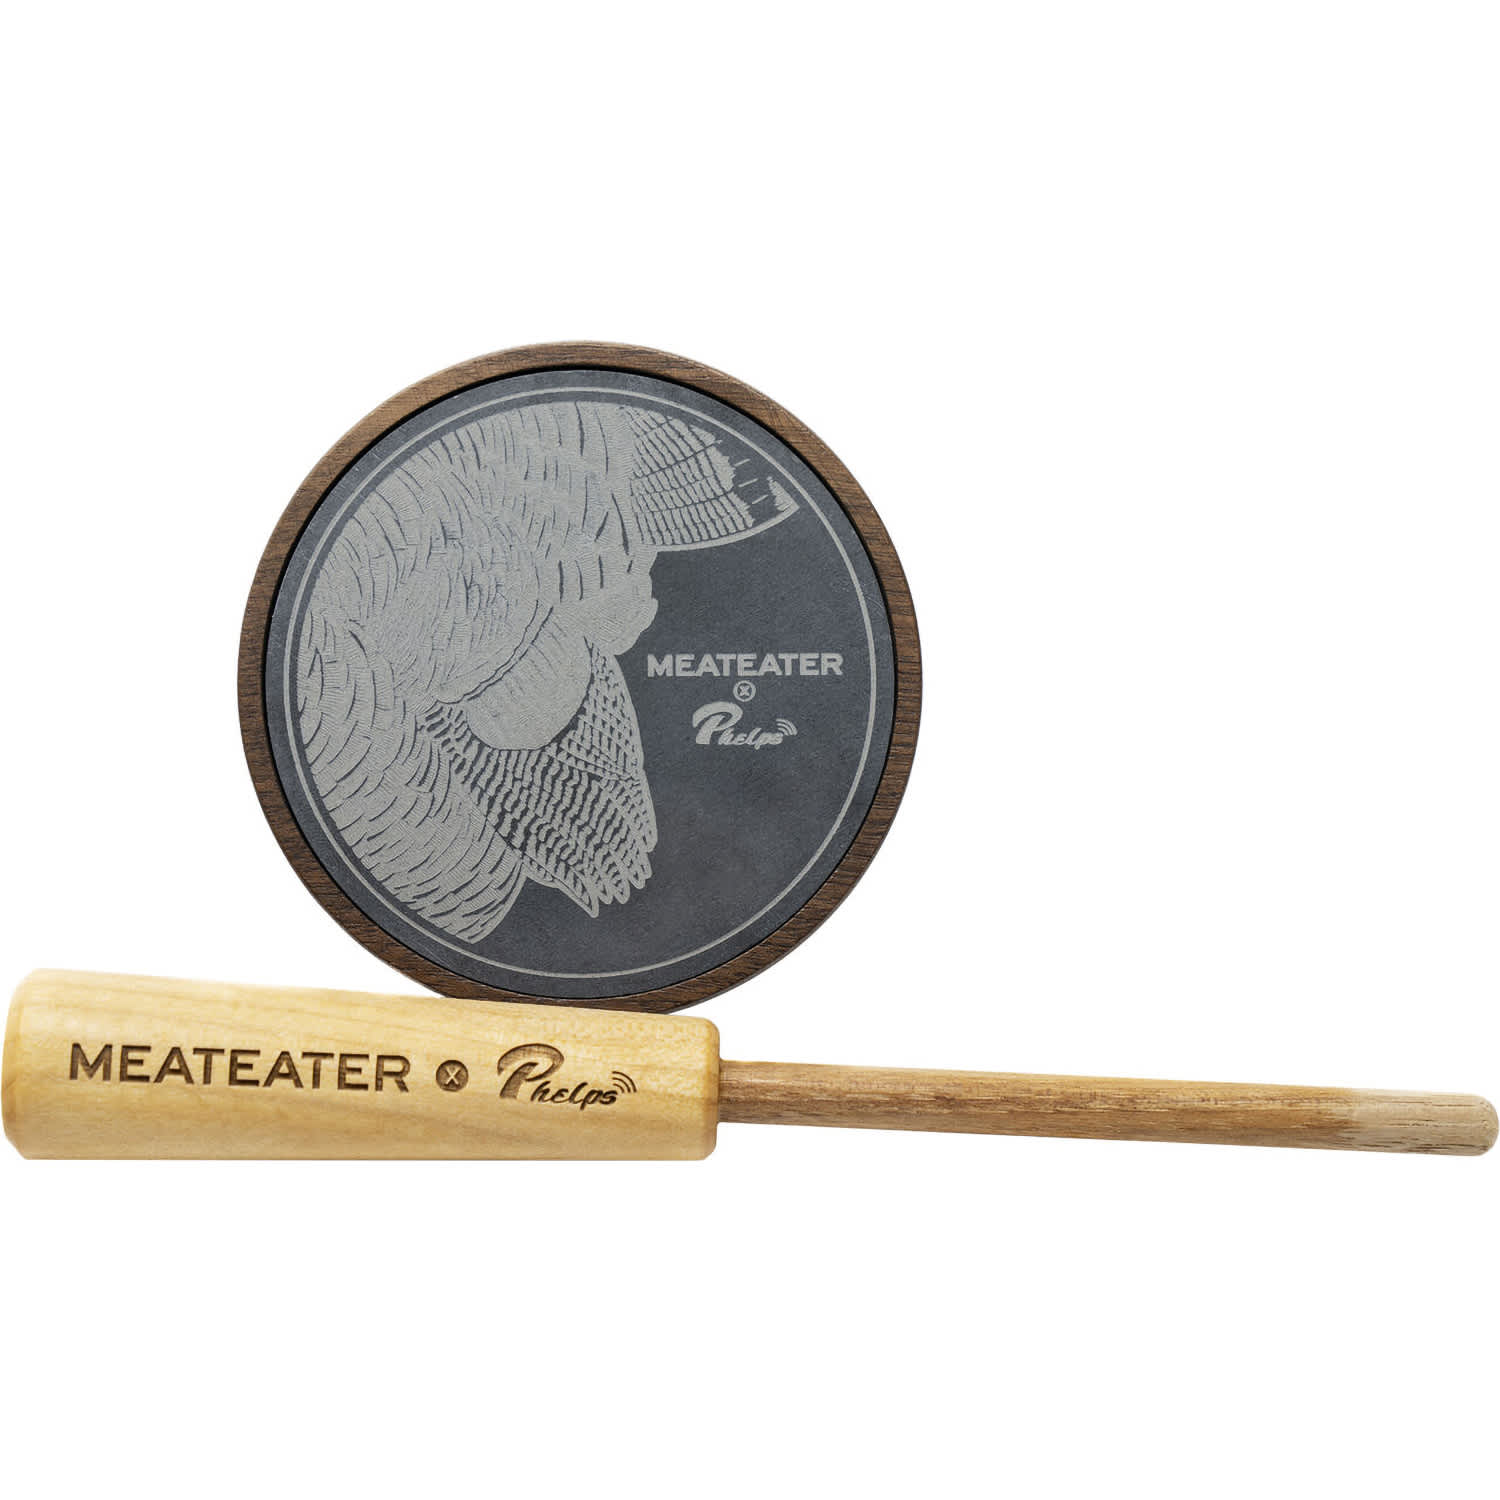 Phelps Meateater X Slate Over Glass Turkey Pot Call